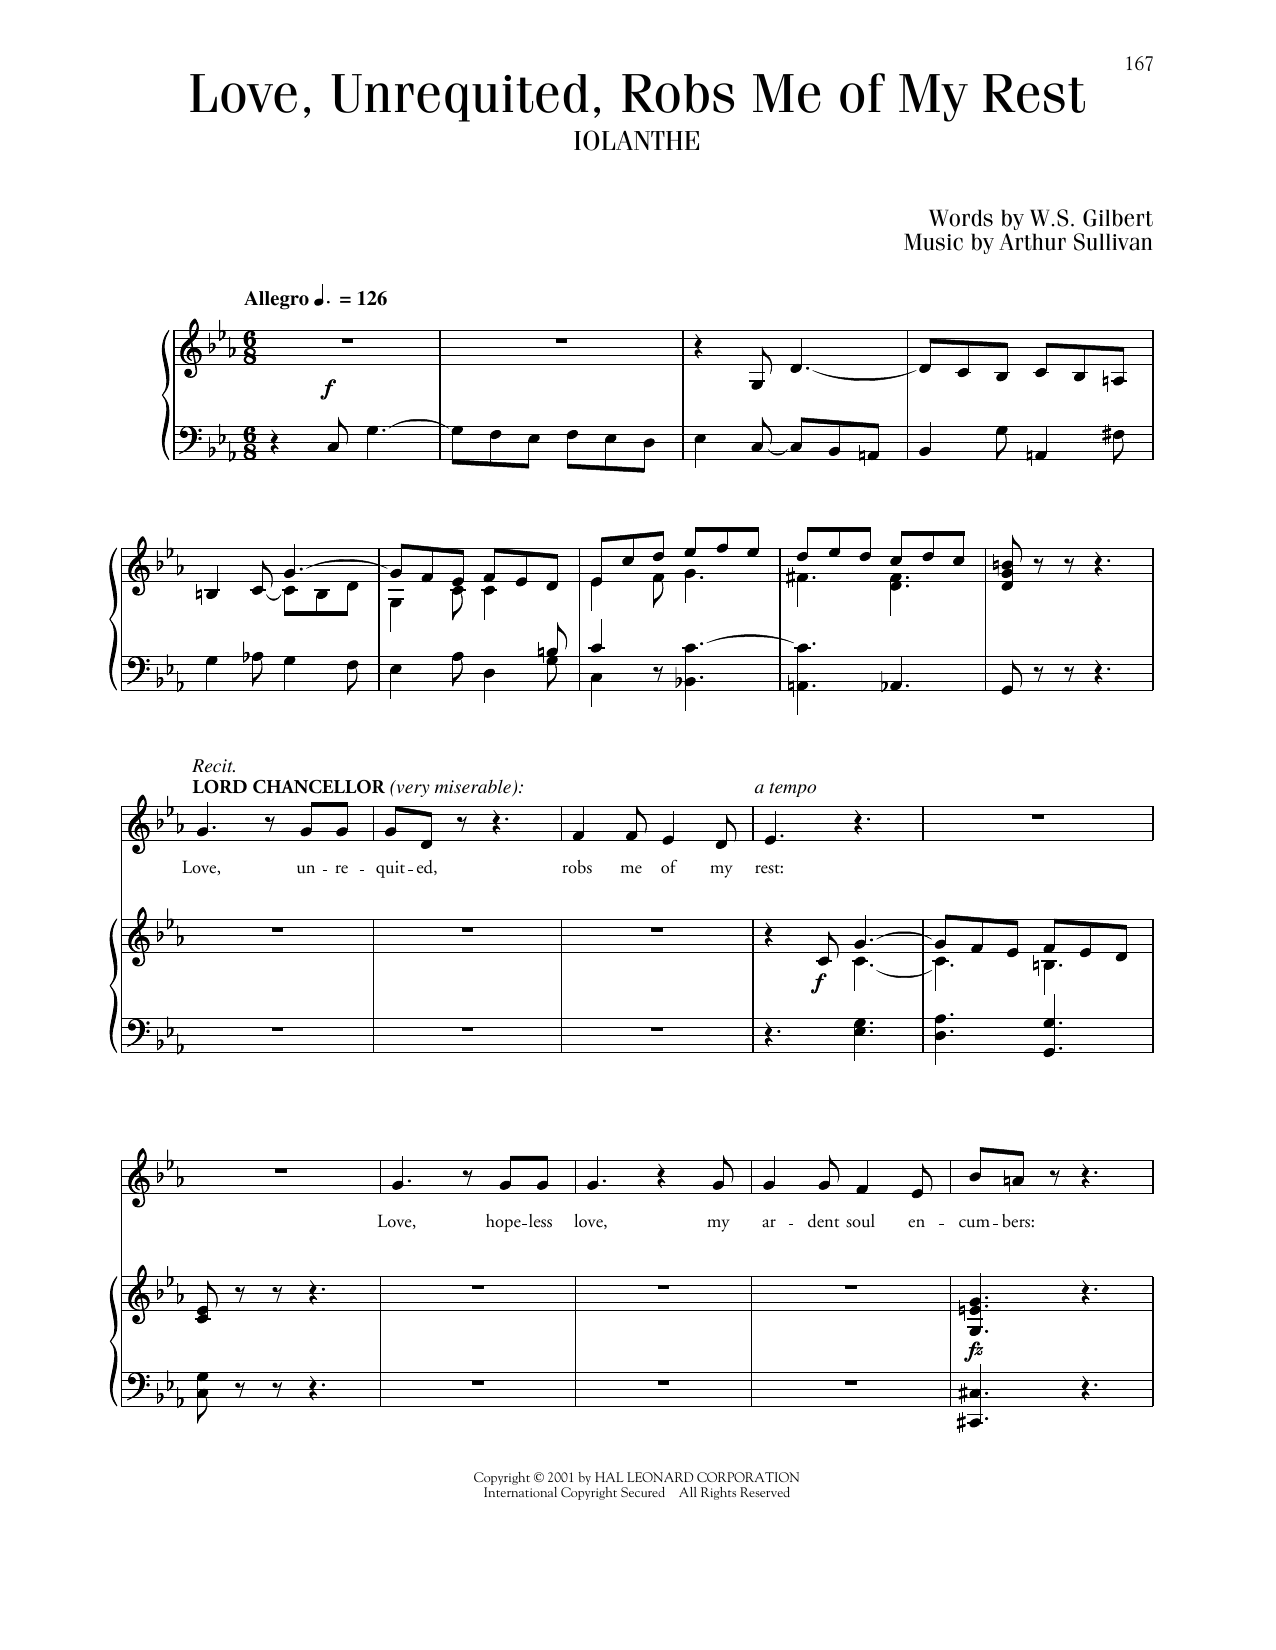 Gilbert & Sullivan Love, Unrequited, Robs Me Of My Rest sheet music notes printable PDF score